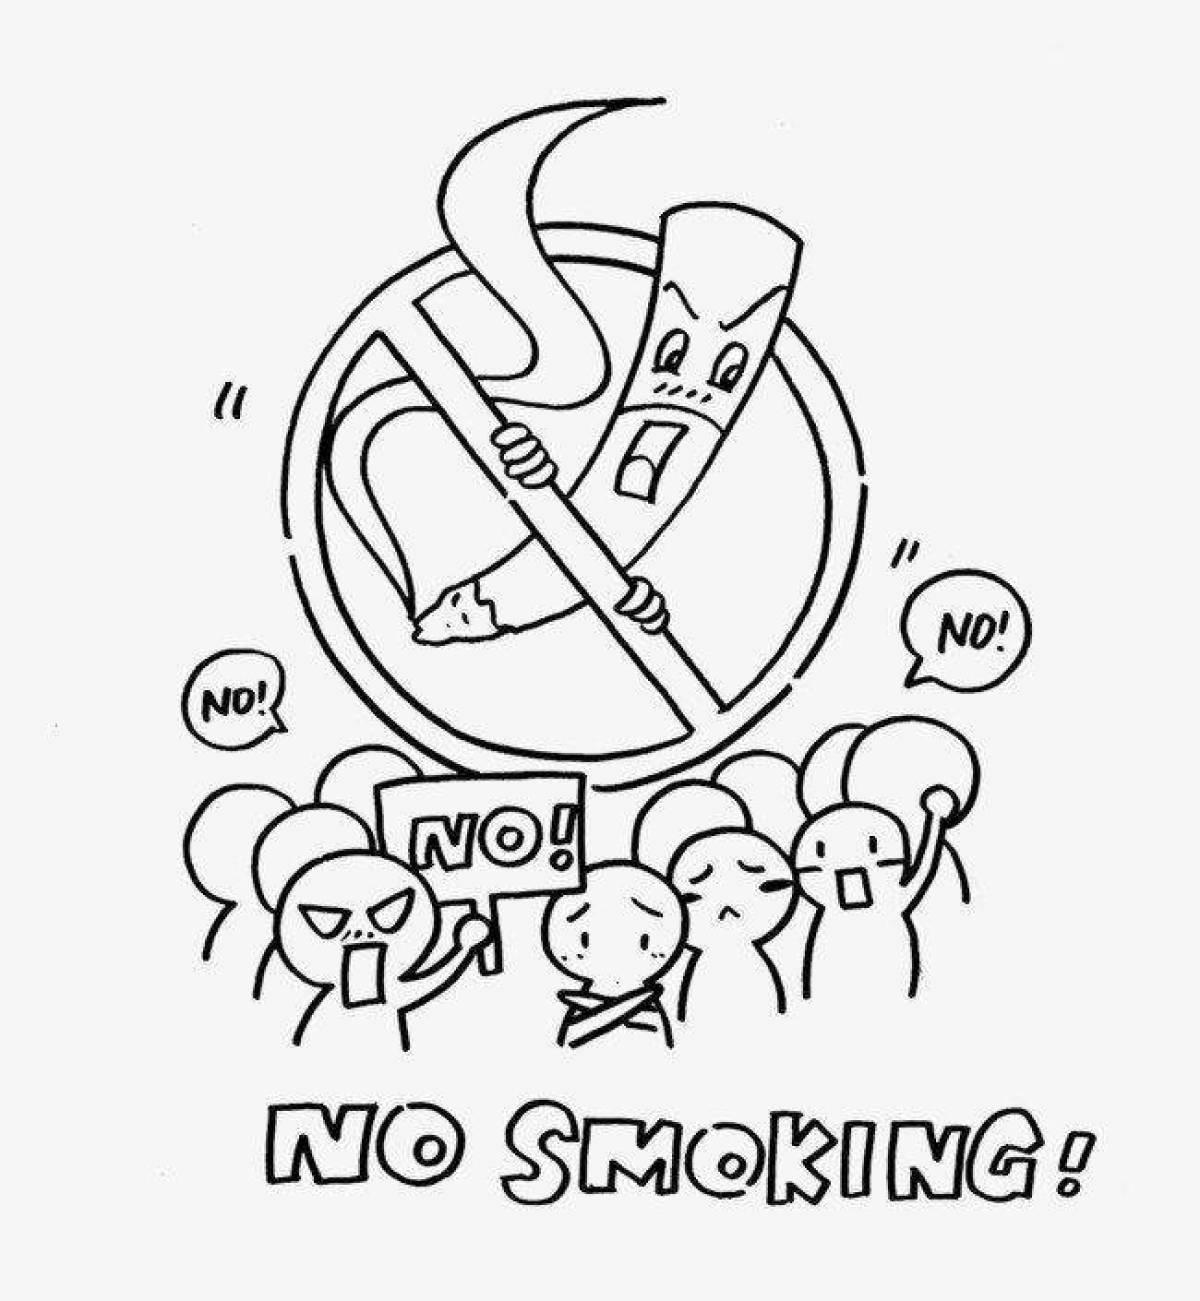 Comic coloring book about bad habits